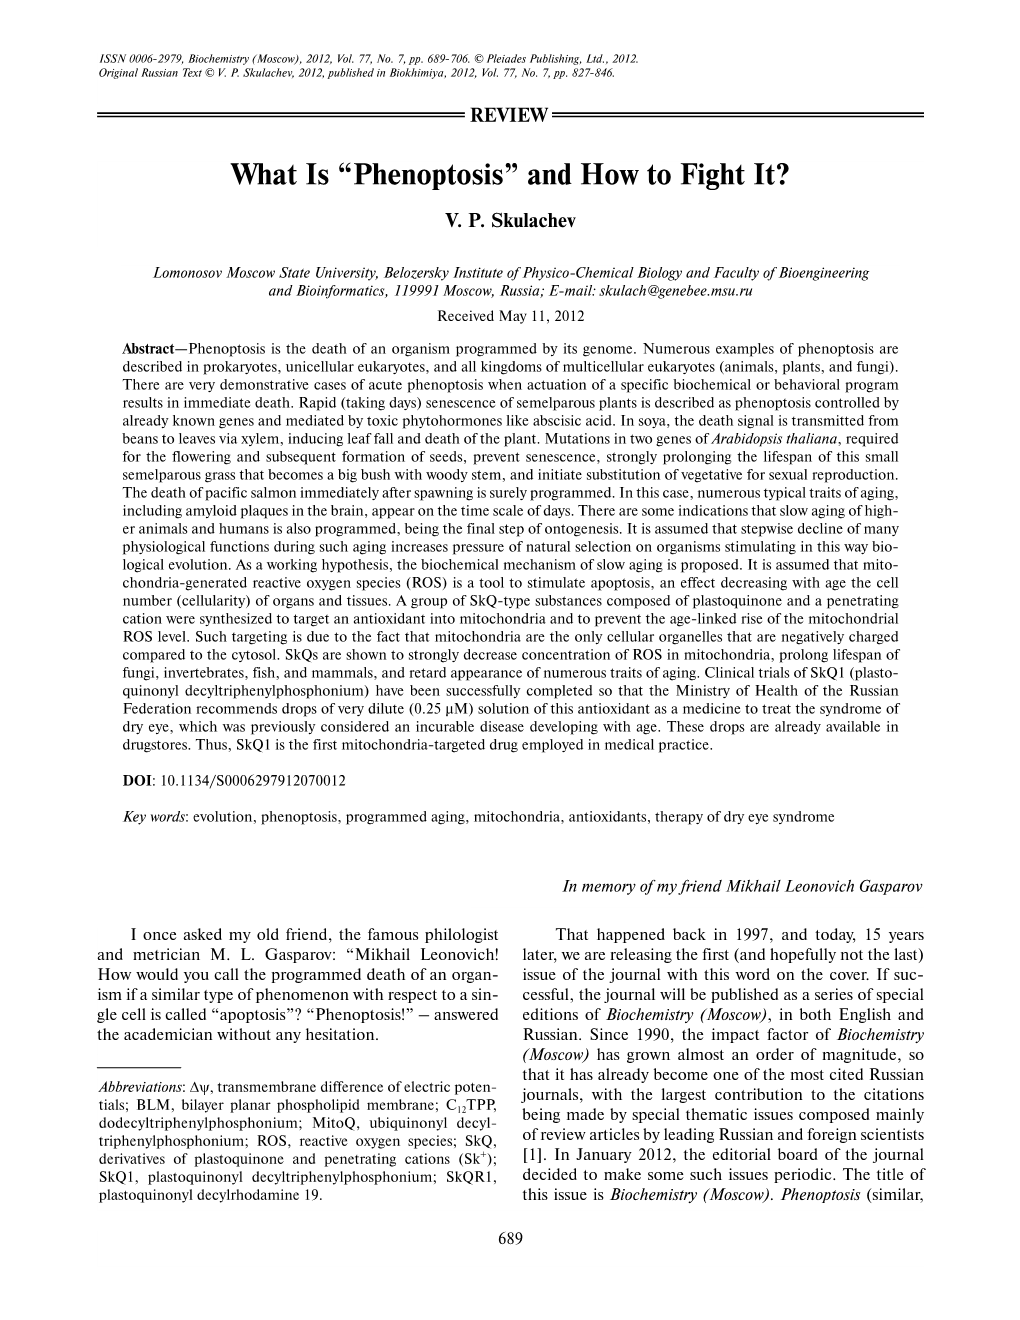 Phenoptosis” and How to Fight It?